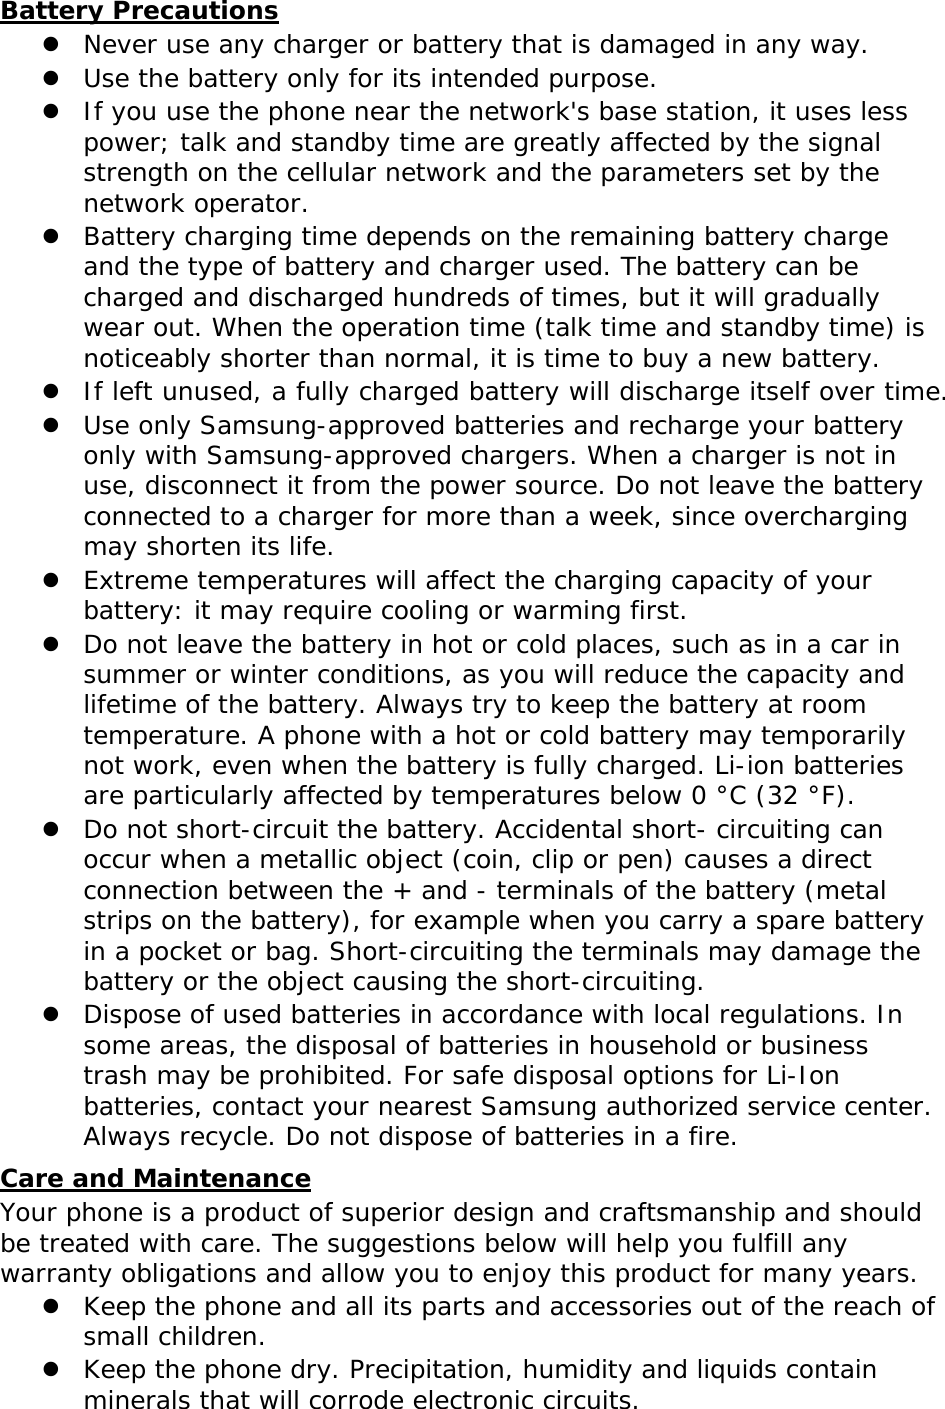 Battery Precautions z Never use any charger or battery that is damaged in any way. z Use the battery only for its intended purpose. z If you use the phone near the network&apos;s base station, it uses less power; talk and standby time are greatly affected by the signal strength on the cellular network and the parameters set by the network operator. z Battery charging time depends on the remaining battery charge and the type of battery and charger used. The battery can be charged and discharged hundreds of times, but it will gradually wear out. When the operation time (talk time and standby time) is noticeably shorter than normal, it is time to buy a new battery. z If left unused, a fully charged battery will discharge itself over time. z Use only Samsung-approved batteries and recharge your battery only with Samsung-approved chargers. When a charger is not in use, disconnect it from the power source. Do not leave the battery connected to a charger for more than a week, since overcharging may shorten its life. z Extreme temperatures will affect the charging capacity of your battery: it may require cooling or warming first. z Do not leave the battery in hot or cold places, such as in a car in summer or winter conditions, as you will reduce the capacity and lifetime of the battery. Always try to keep the battery at room temperature. A phone with a hot or cold battery may temporarily not work, even when the battery is fully charged. Li-ion batteries are particularly affected by temperatures below 0 °C (32 °F). z Do not short-circuit the battery. Accidental short- circuiting can occur when a metallic object (coin, clip or pen) causes a direct connection between the + and - terminals of the battery (metal strips on the battery), for example when you carry a spare battery in a pocket or bag. Short-circuiting the terminals may damage the battery or the object causing the short-circuiting. z Dispose of used batteries in accordance with local regulations. In some areas, the disposal of batteries in household or business trash may be prohibited. For safe disposal options for Li-Ion batteries, contact your nearest Samsung authorized service center. Always recycle. Do not dispose of batteries in a fire. Care and Maintenance Your phone is a product of superior design and craftsmanship and should be treated with care. The suggestions below will help you fulfill any warranty obligations and allow you to enjoy this product for many years. z Keep the phone and all its parts and accessories out of the reach of small children. z Keep the phone dry. Precipitation, humidity and liquids contain minerals that will corrode electronic circuits. 